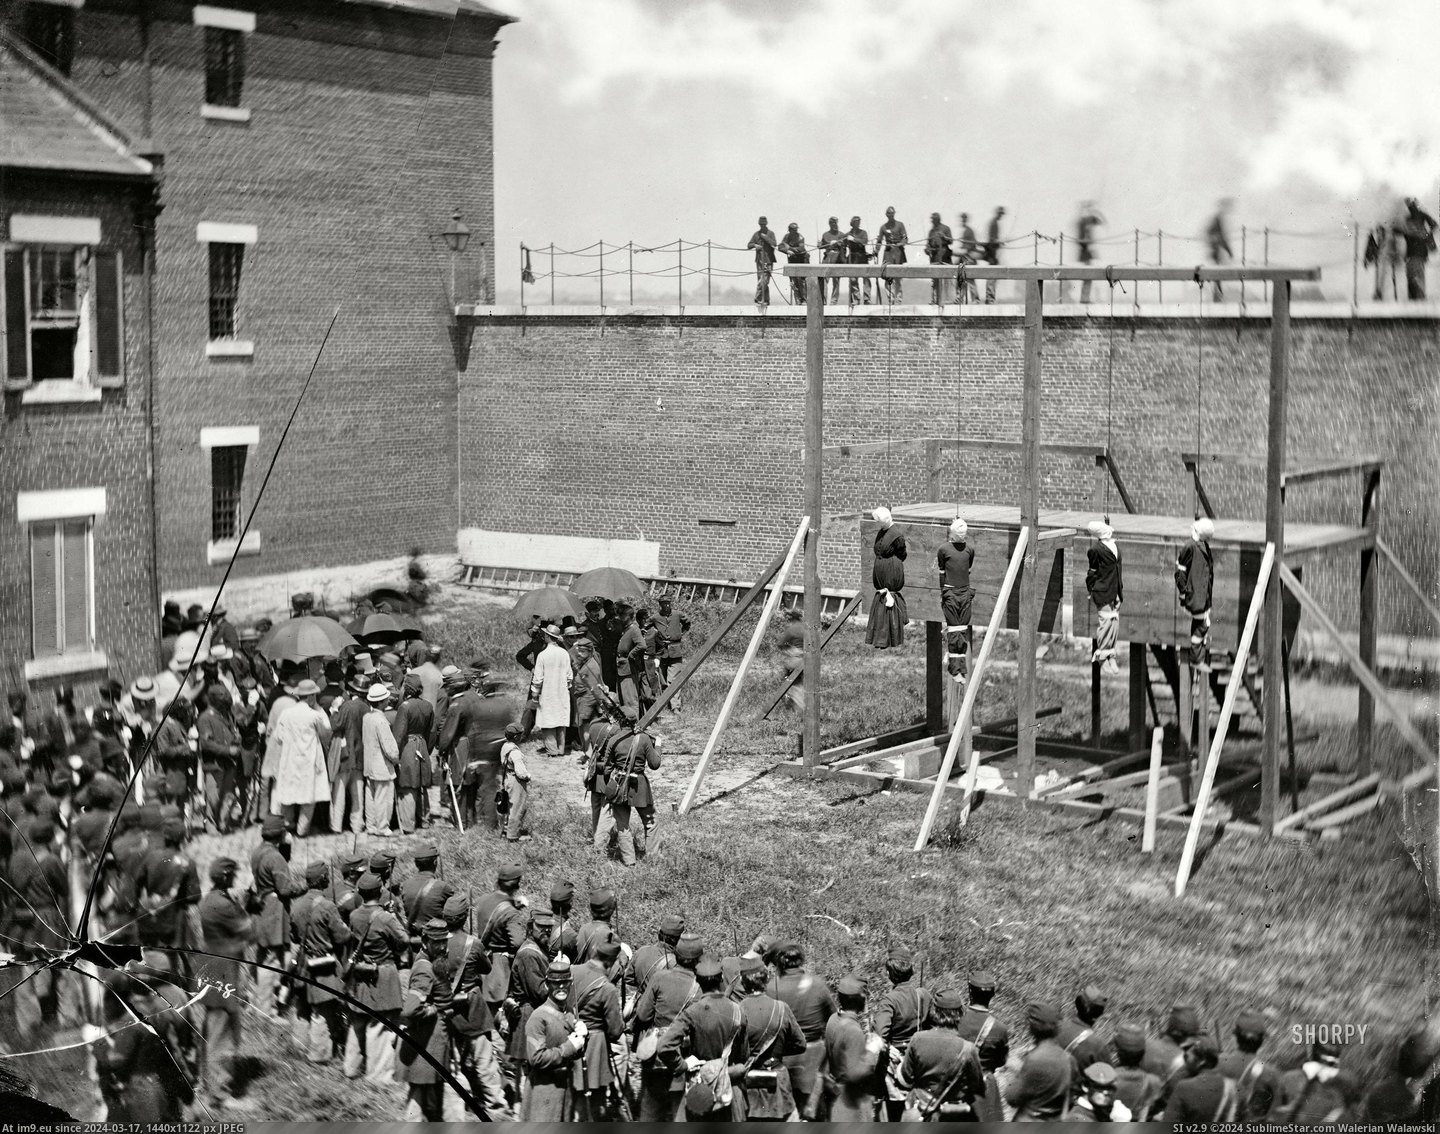 #Photo #High #Lincoln #Abraham #Resolution #Incredibly [Pics] Came across this incredibly high-resolution photo from 1865: Abraham Lincoln's assassinators at the gallows [NSFW]. Pic. (Изображение из альбом My r/PICS favs))